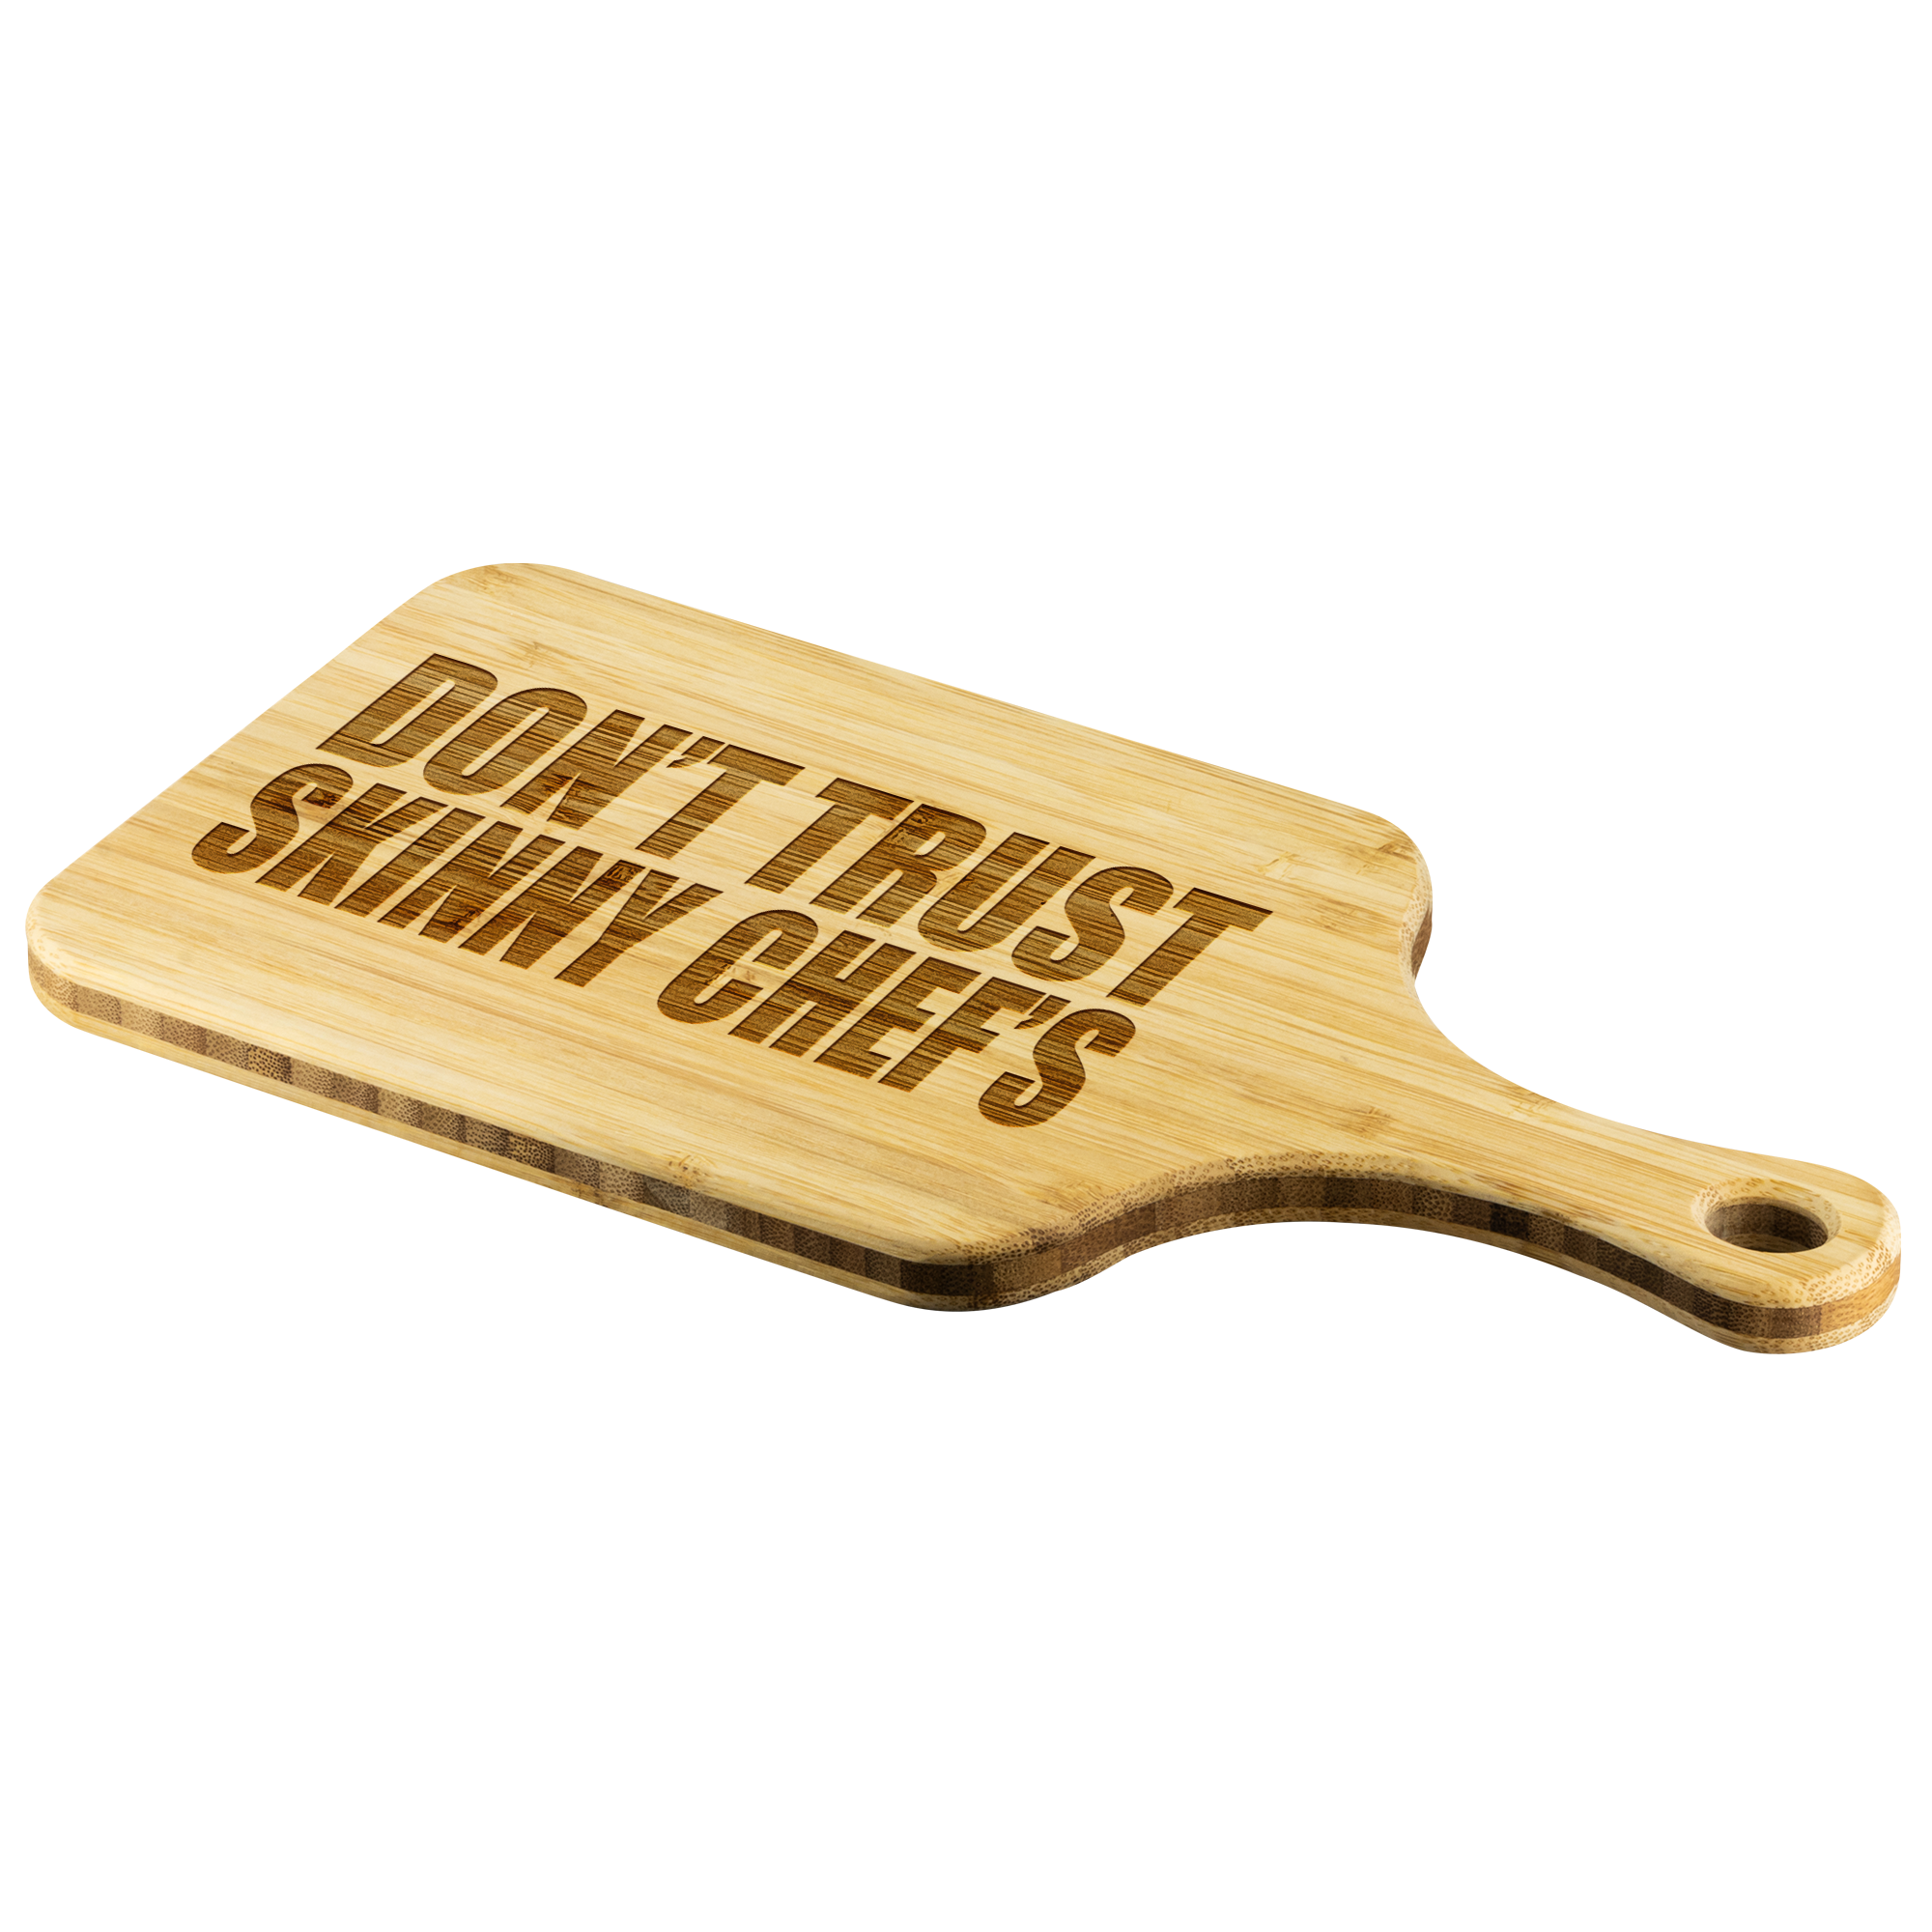 Don't Trust Skinny Chefs Funny Wood Cutting Board | Sarcastic Me